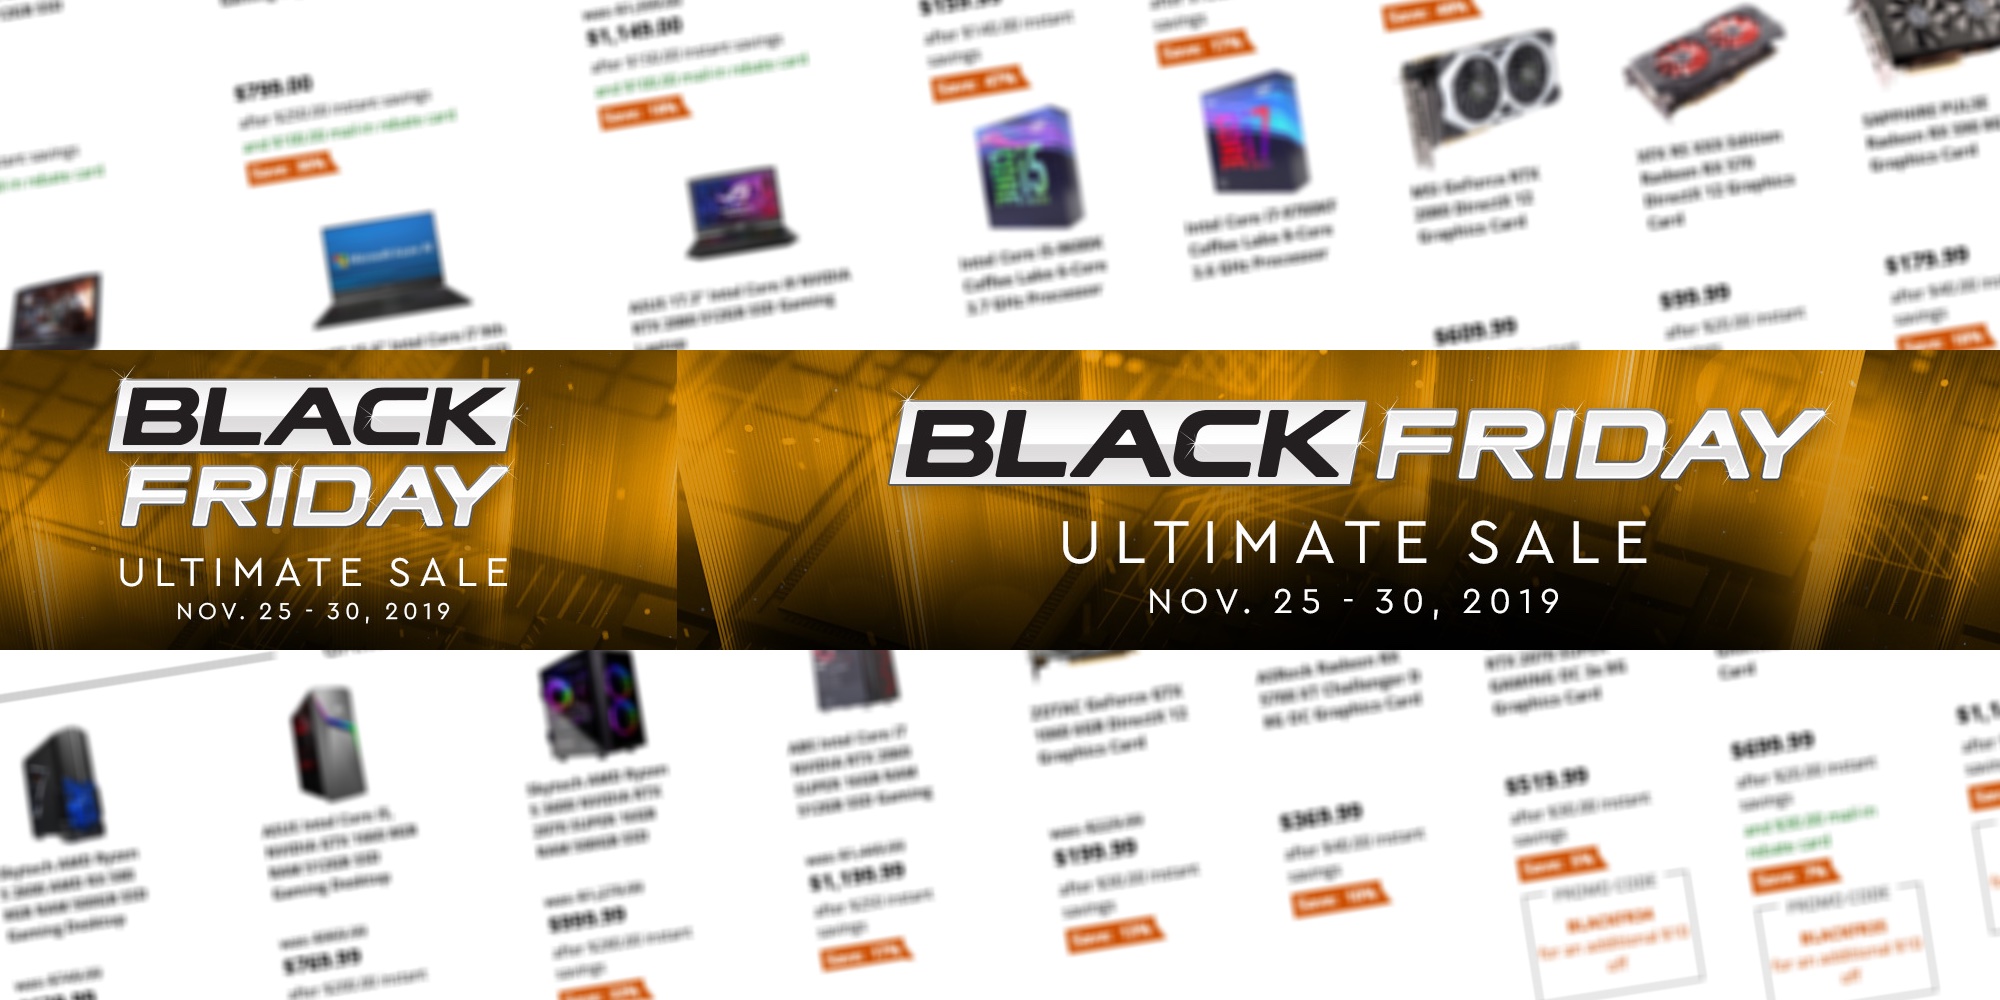 Newegg Black Friday Ad 2019 delivers deals on PC gear, more - 9to5Toys - How Long Is Neweggs Black Friday Deala